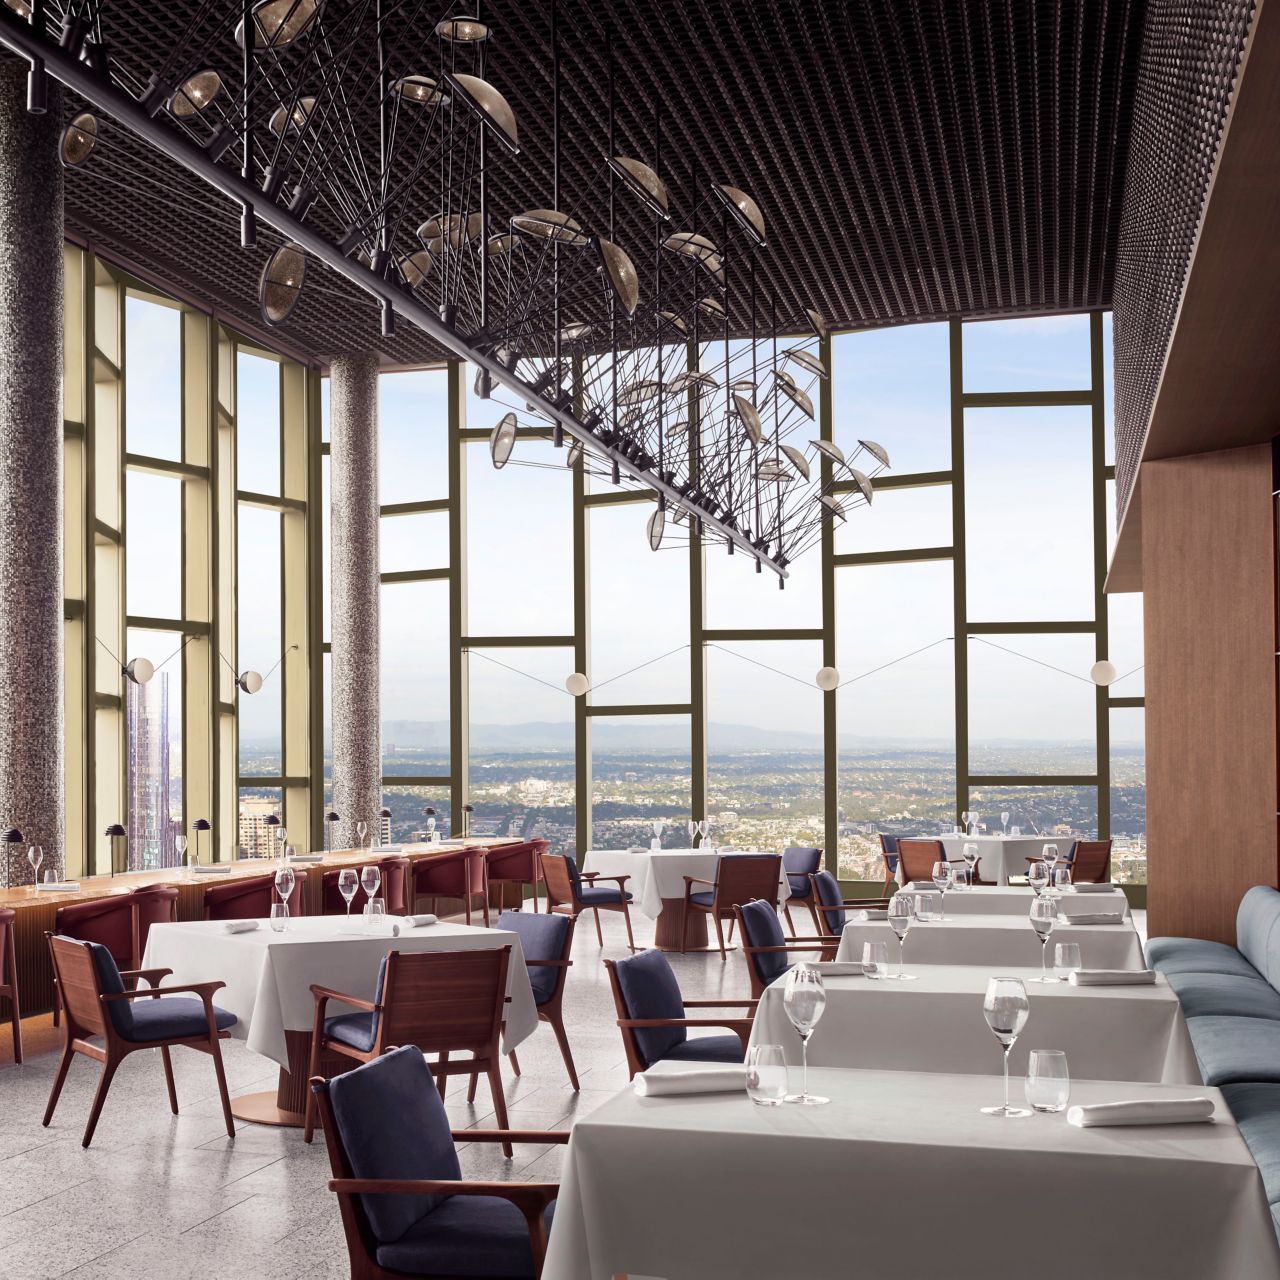 Atria dining area with a view